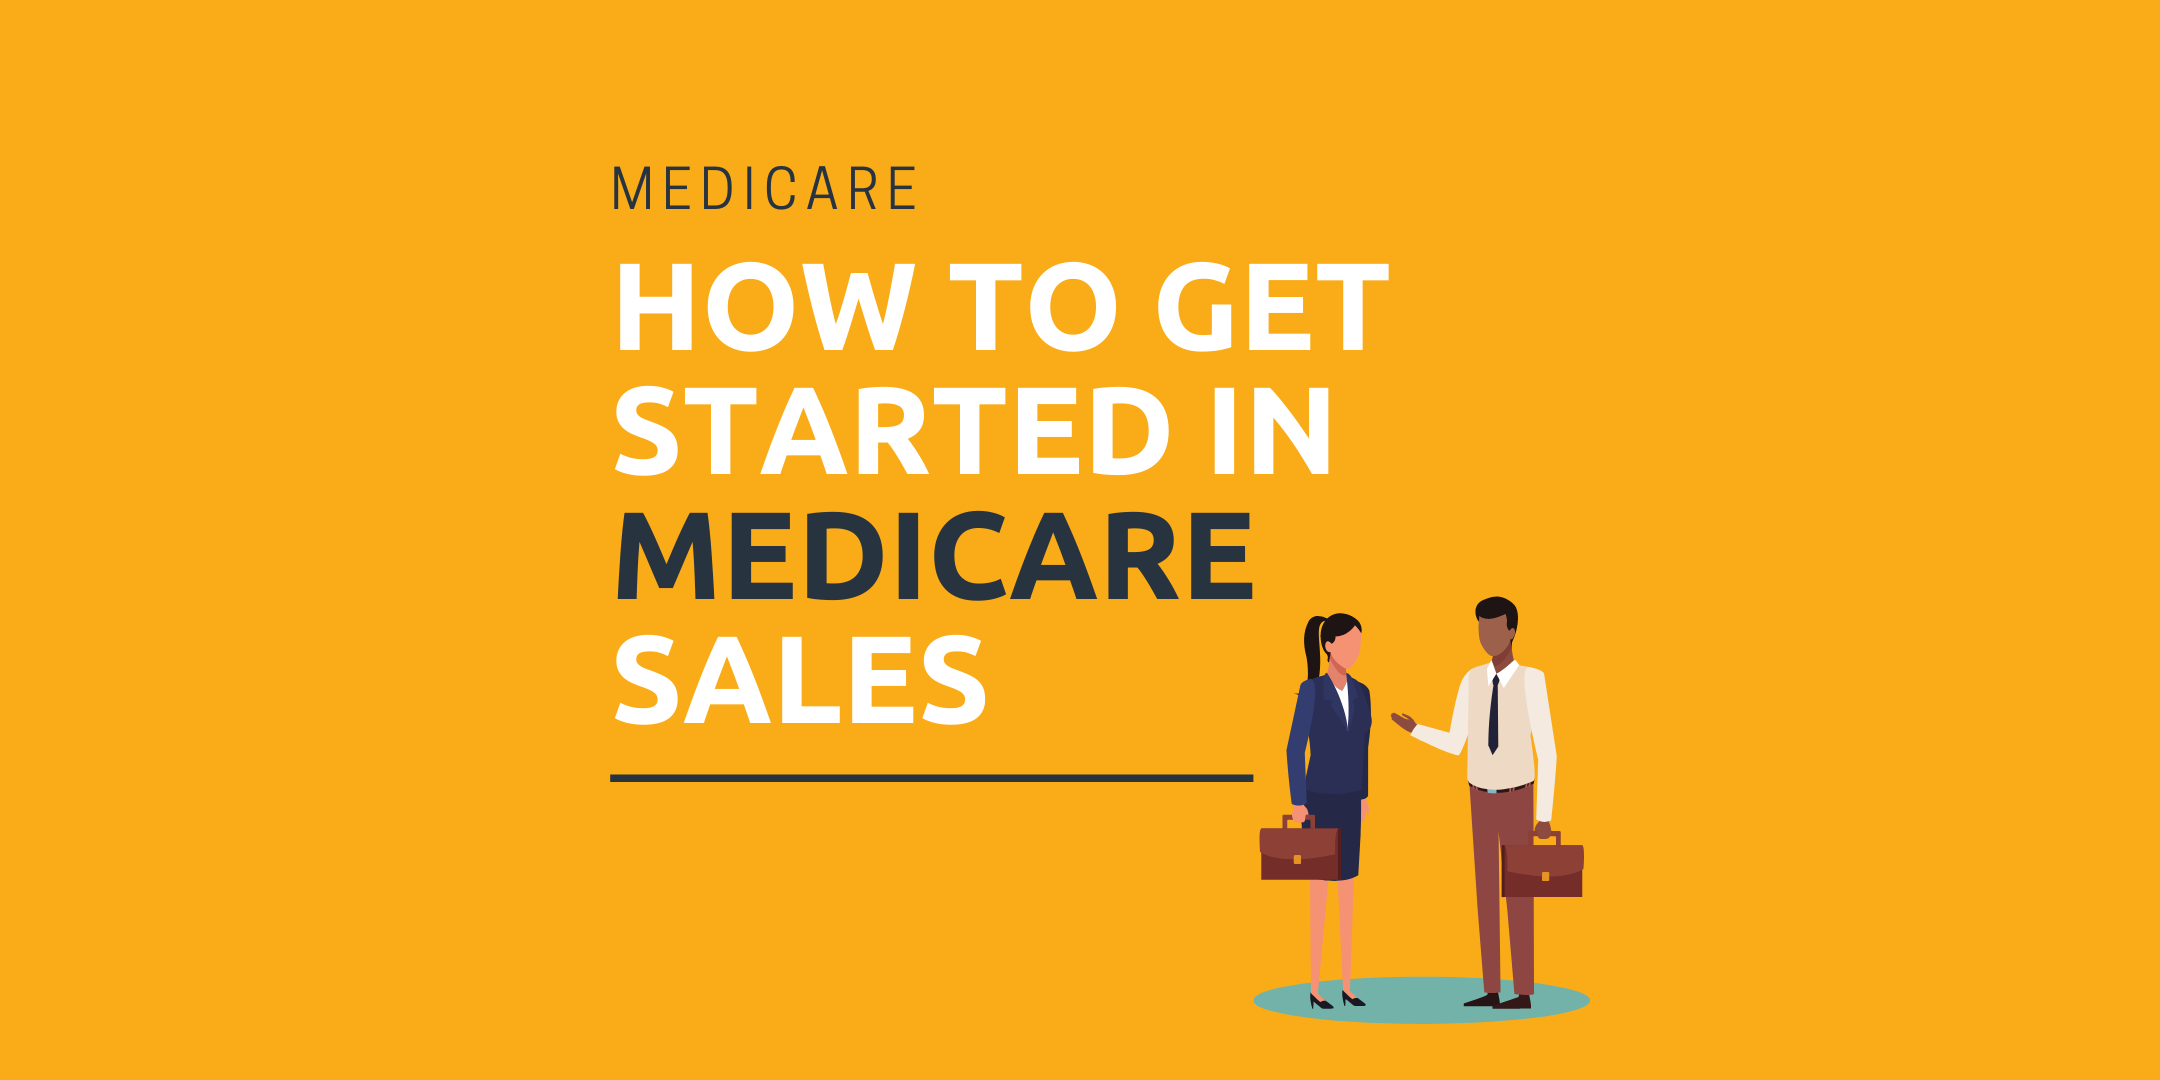 How to Get Started in Medicare Sales